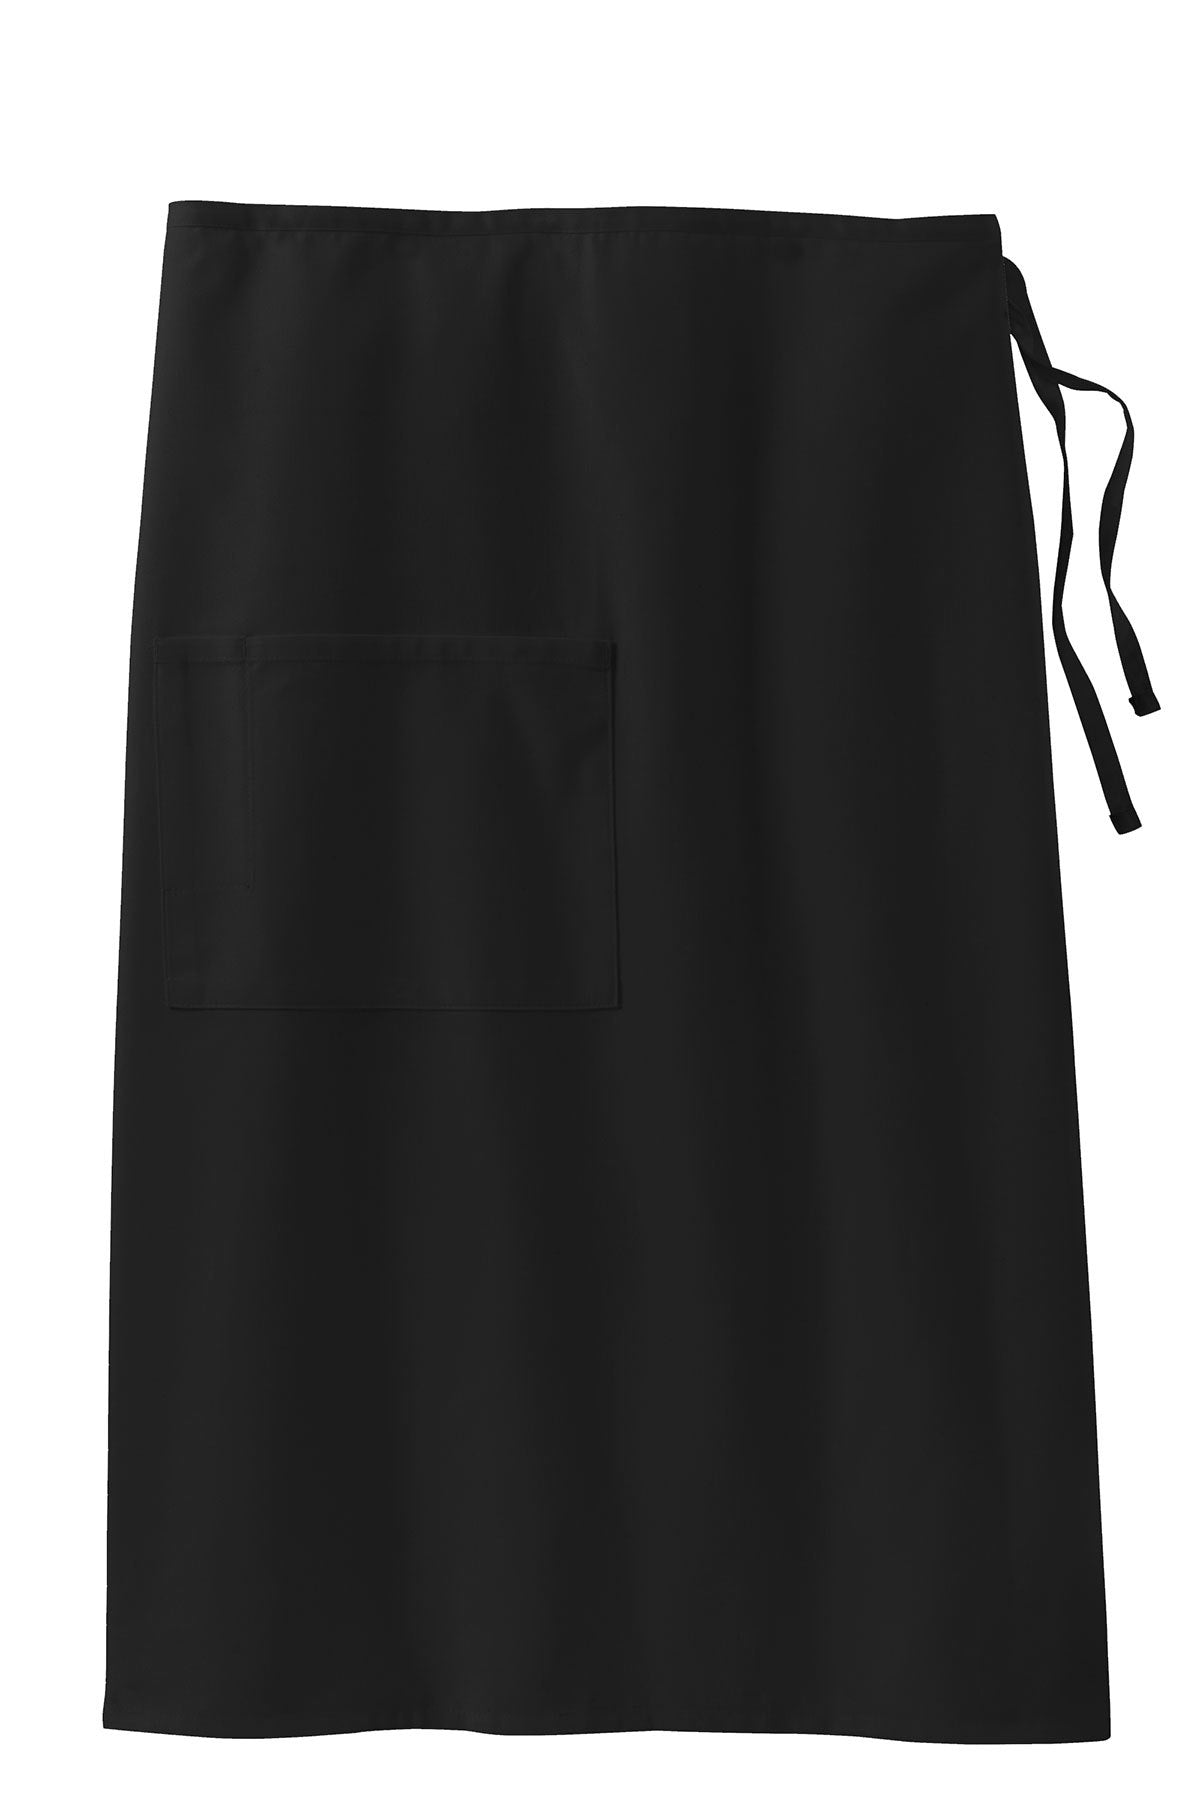 Port Authority Easy Care Full Bistro Custom Aprons with Stain Release, Black